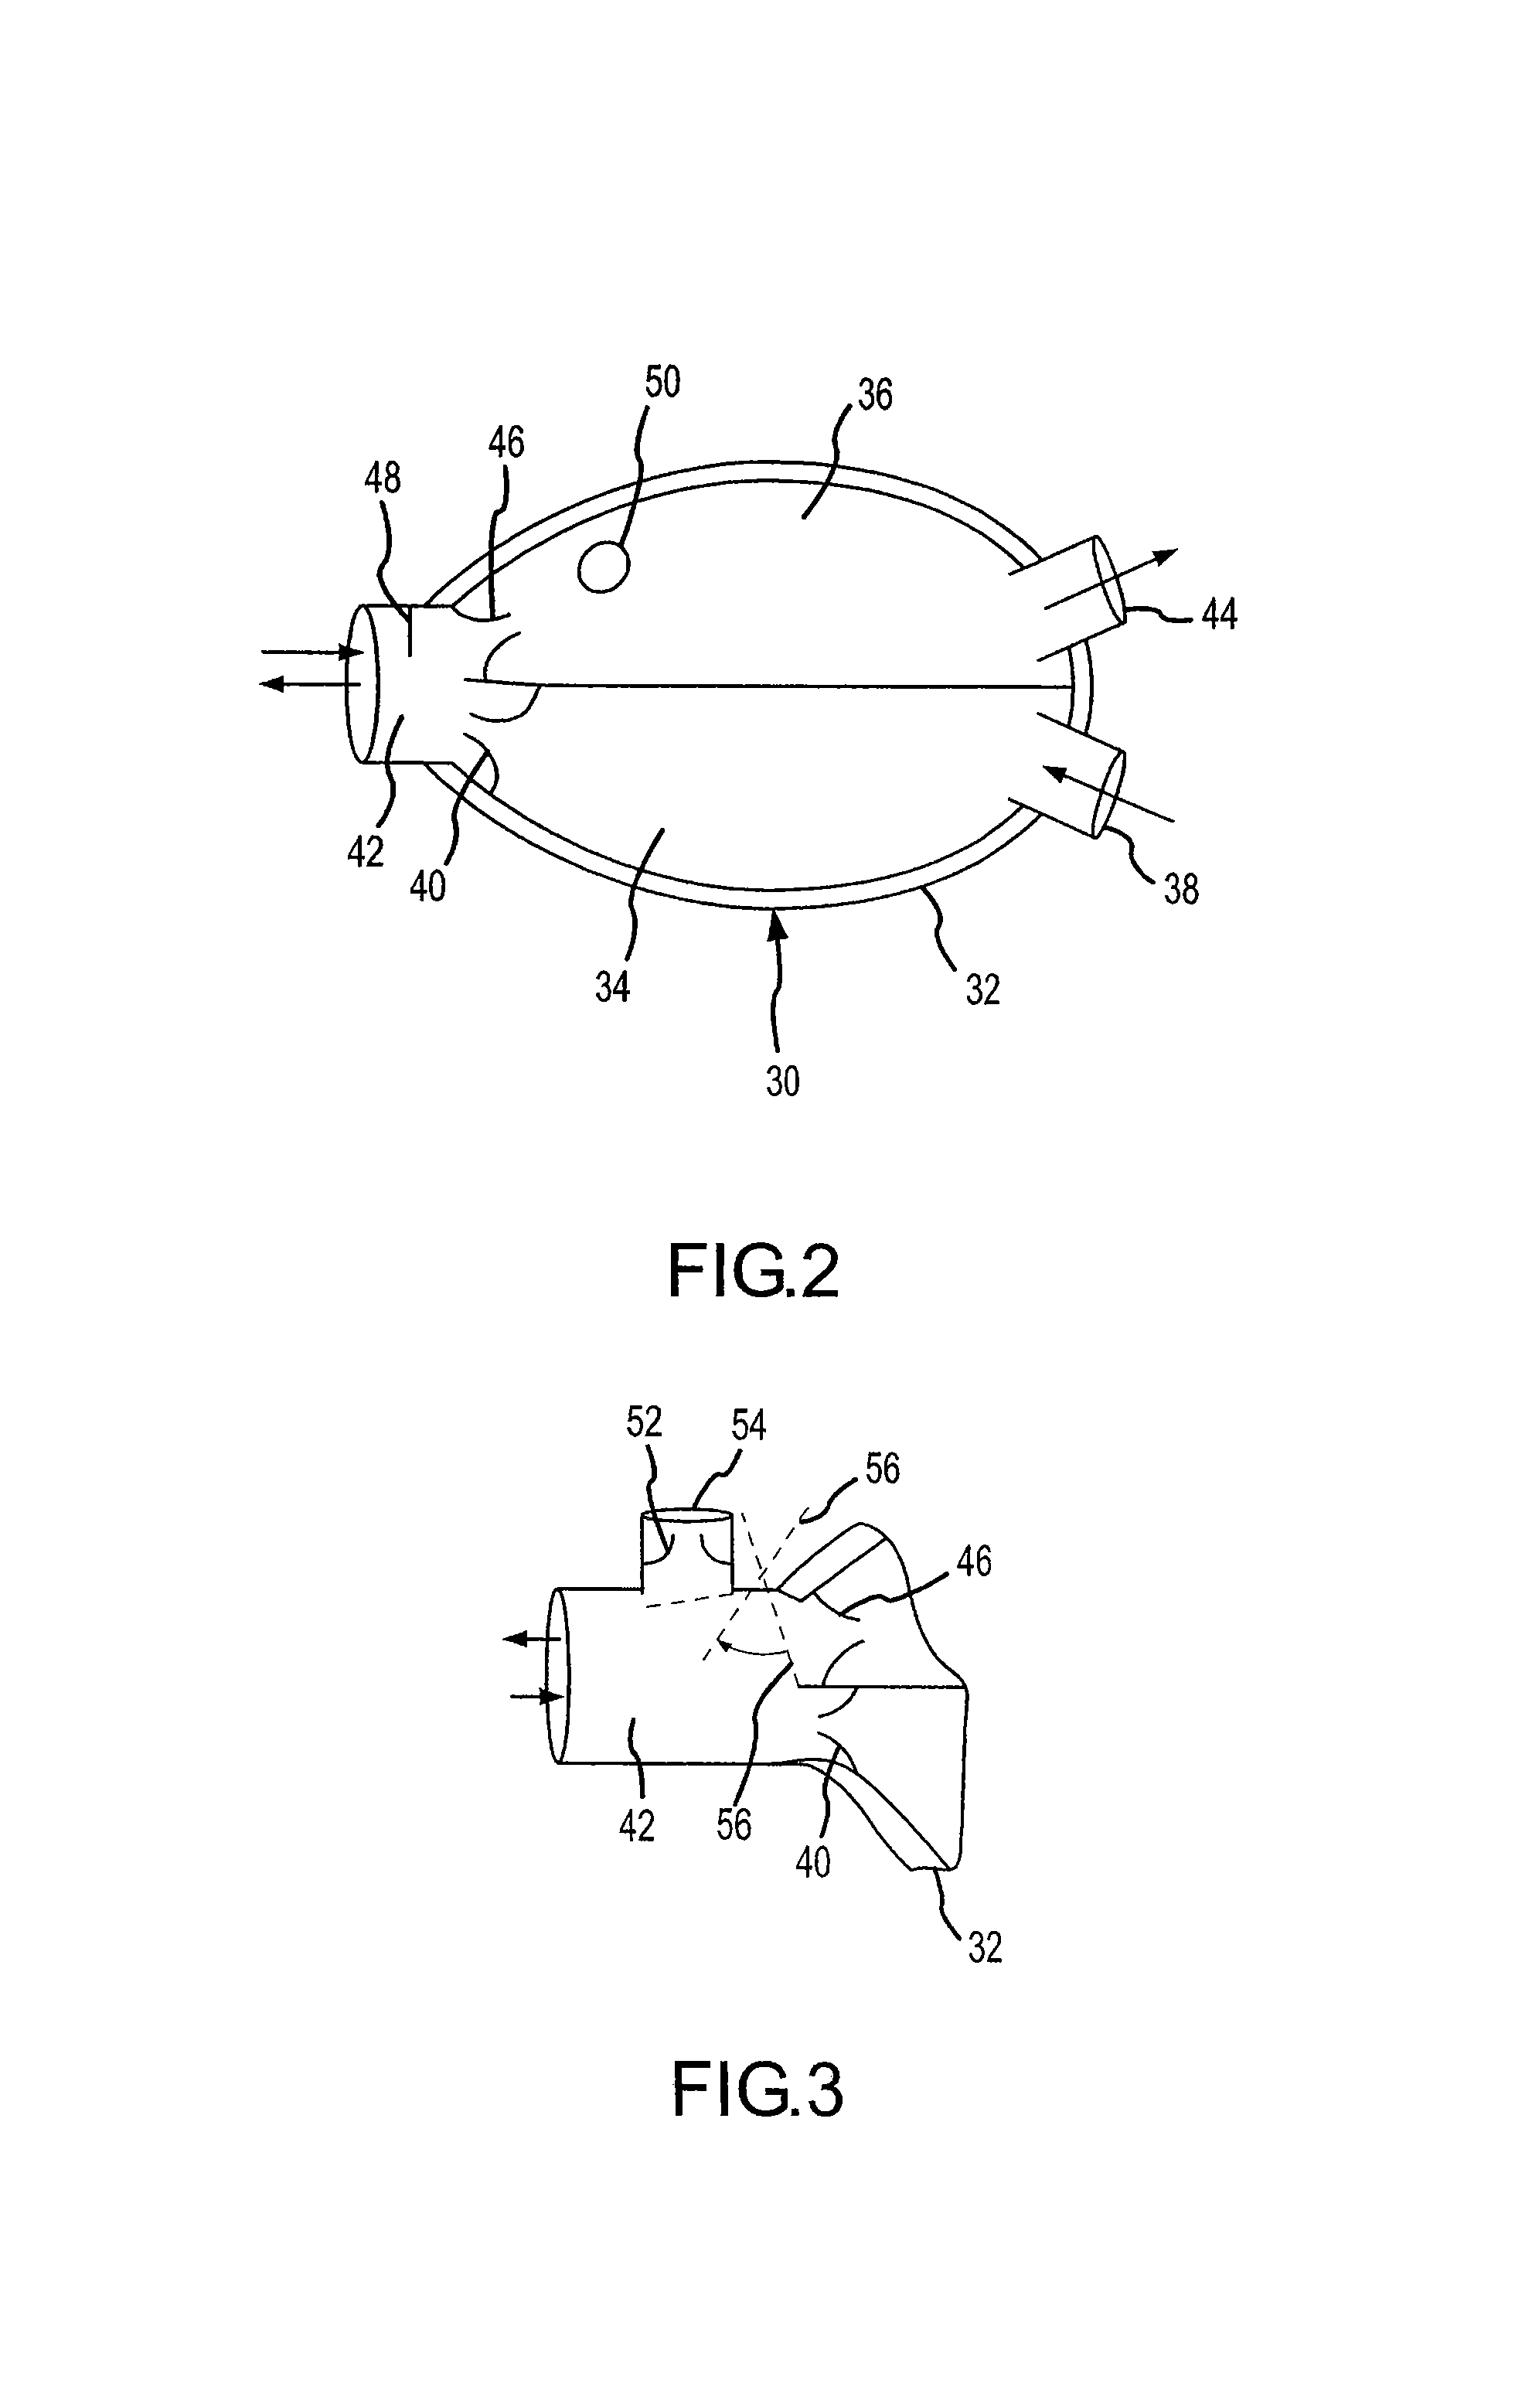 CPR devices and methods utilizing a continuous supply of respiratory gases